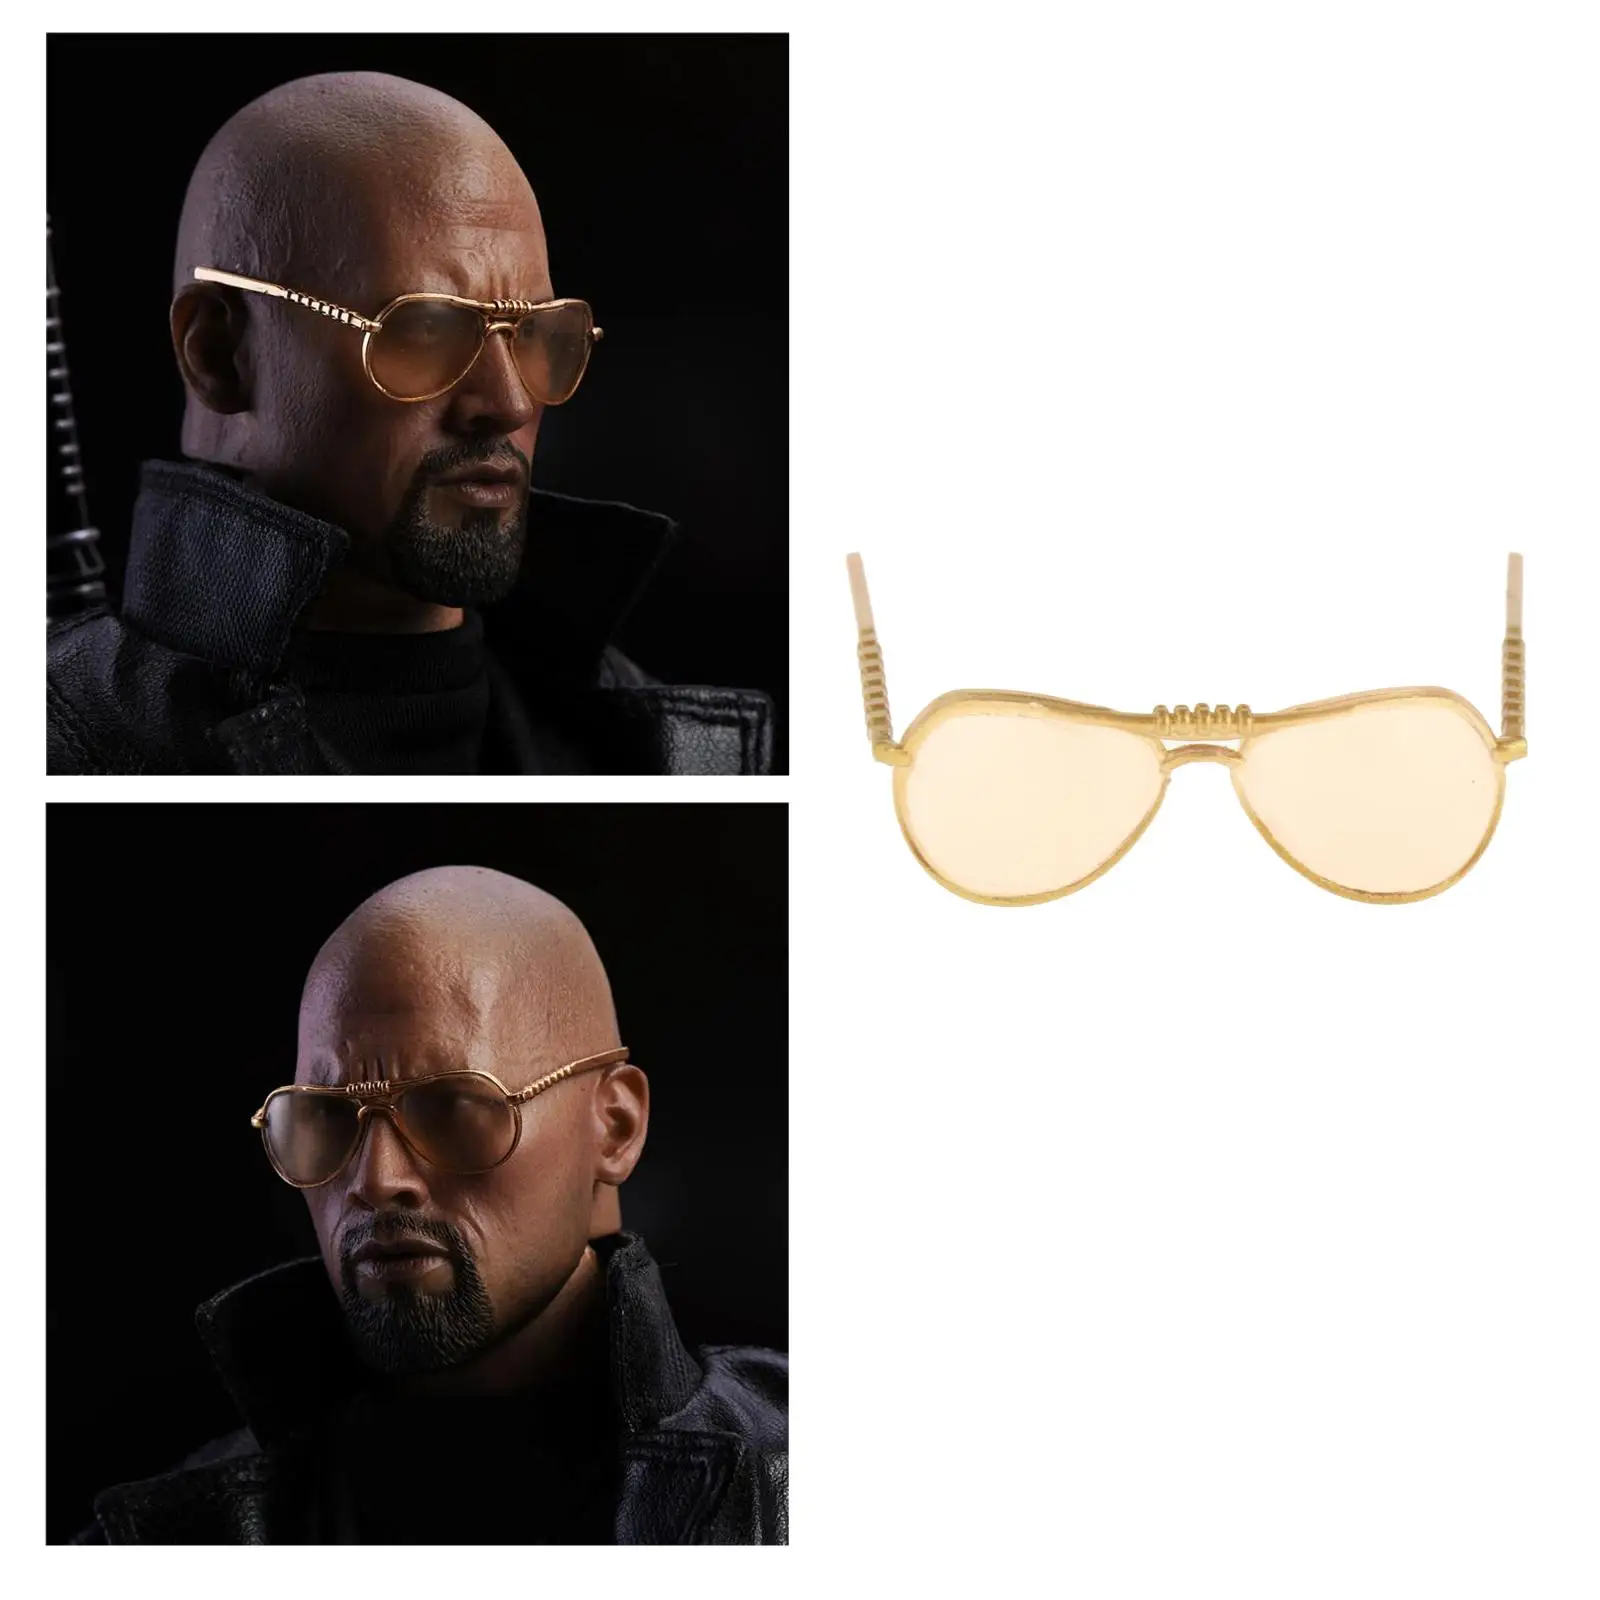 1:6 Scale Classic Retro Vintage Style Round Glasses Sunglasses Alloy Frame for 12inch Action Figure Costume